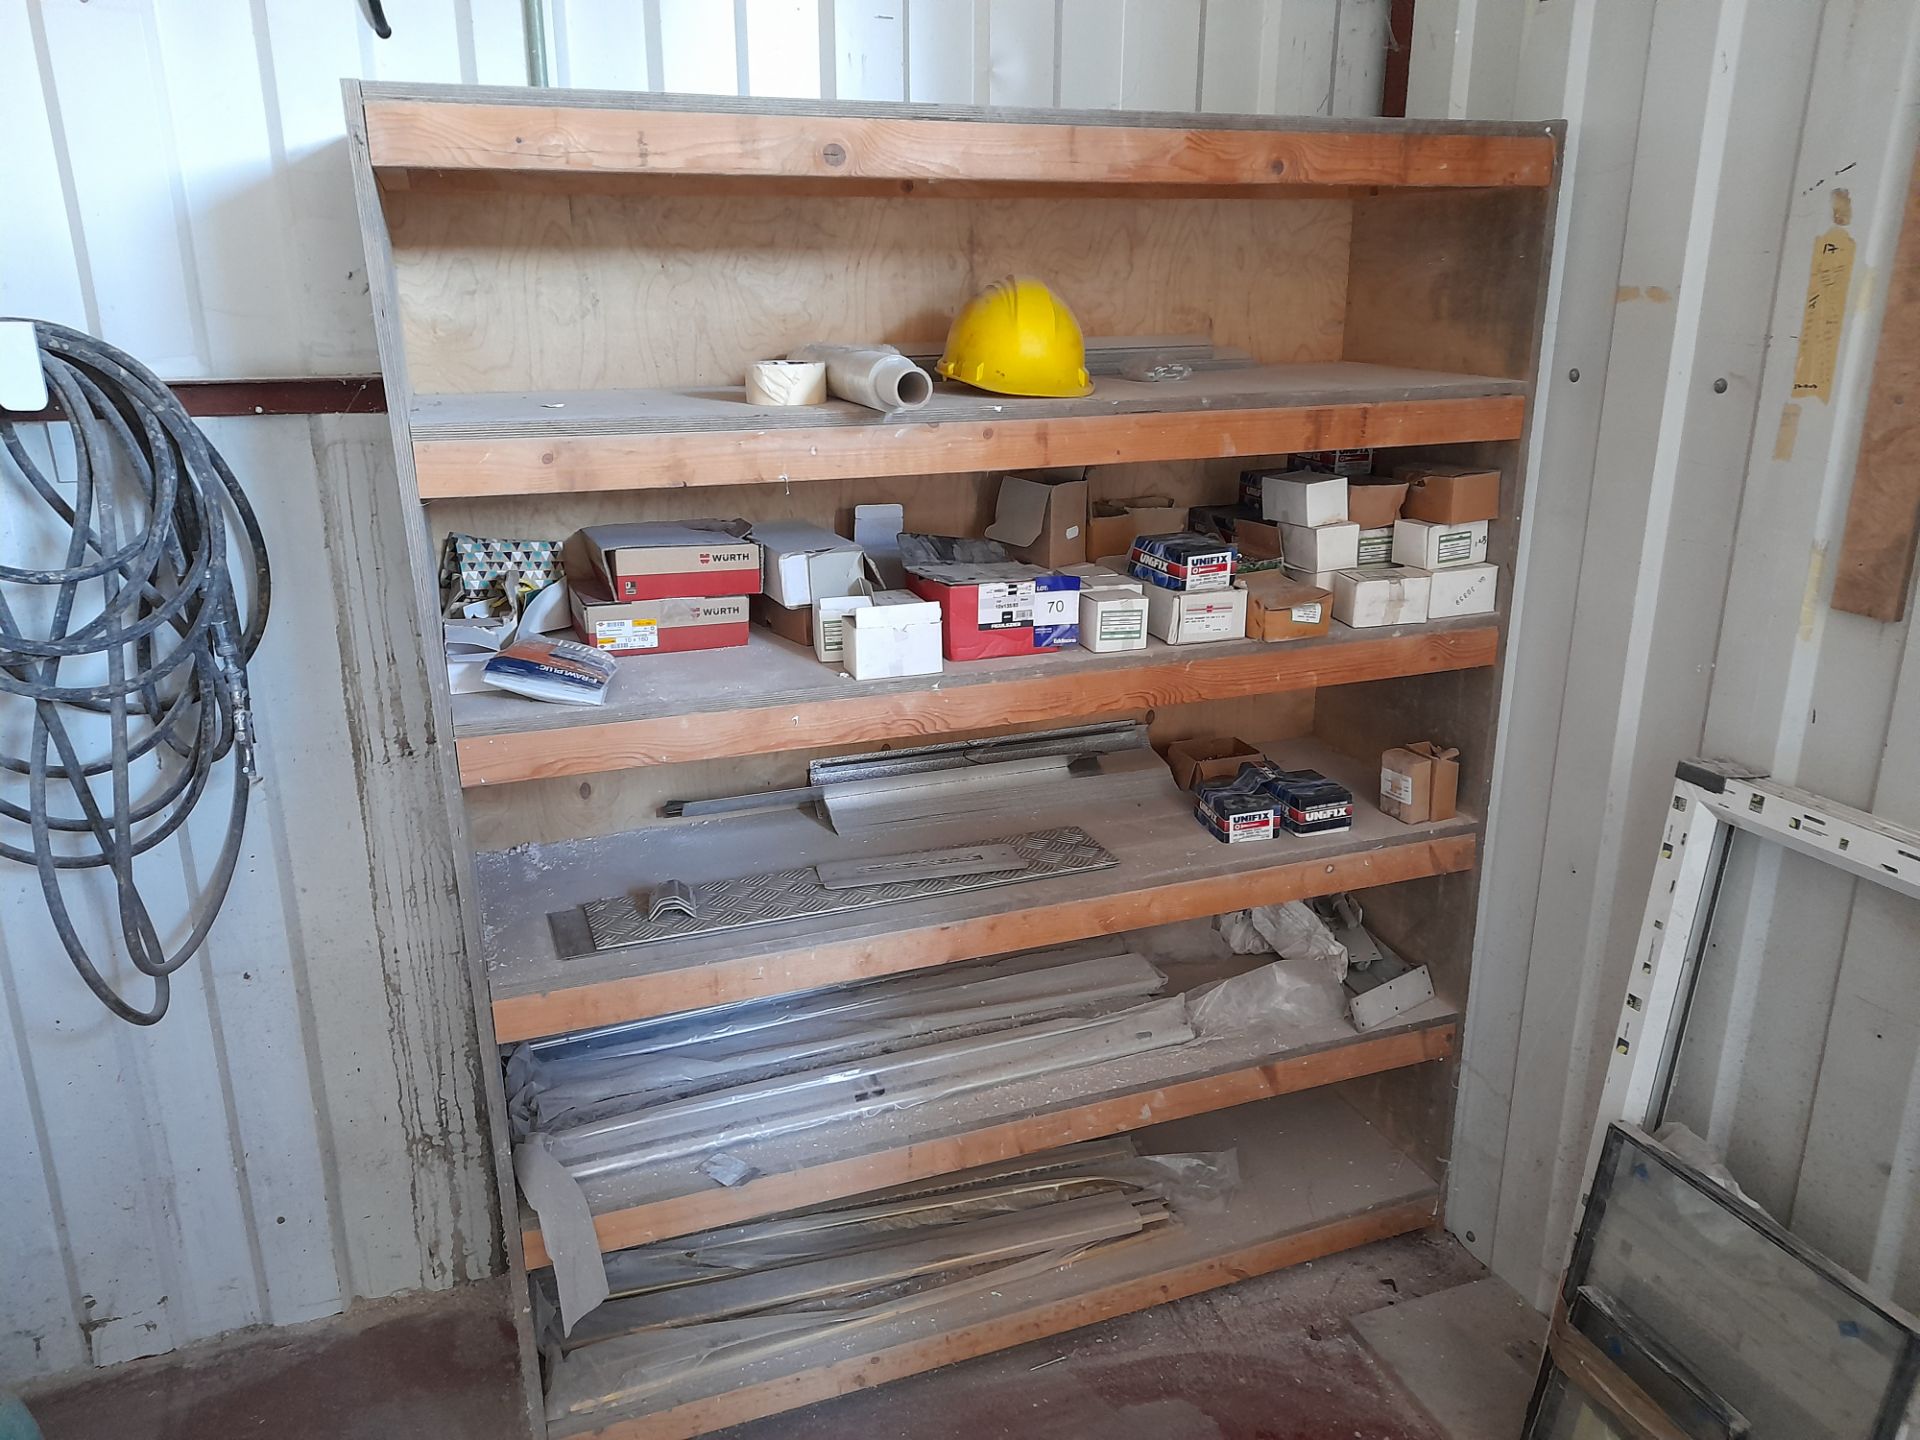 5 shelf Wooden Storage Unit with contents as lotte